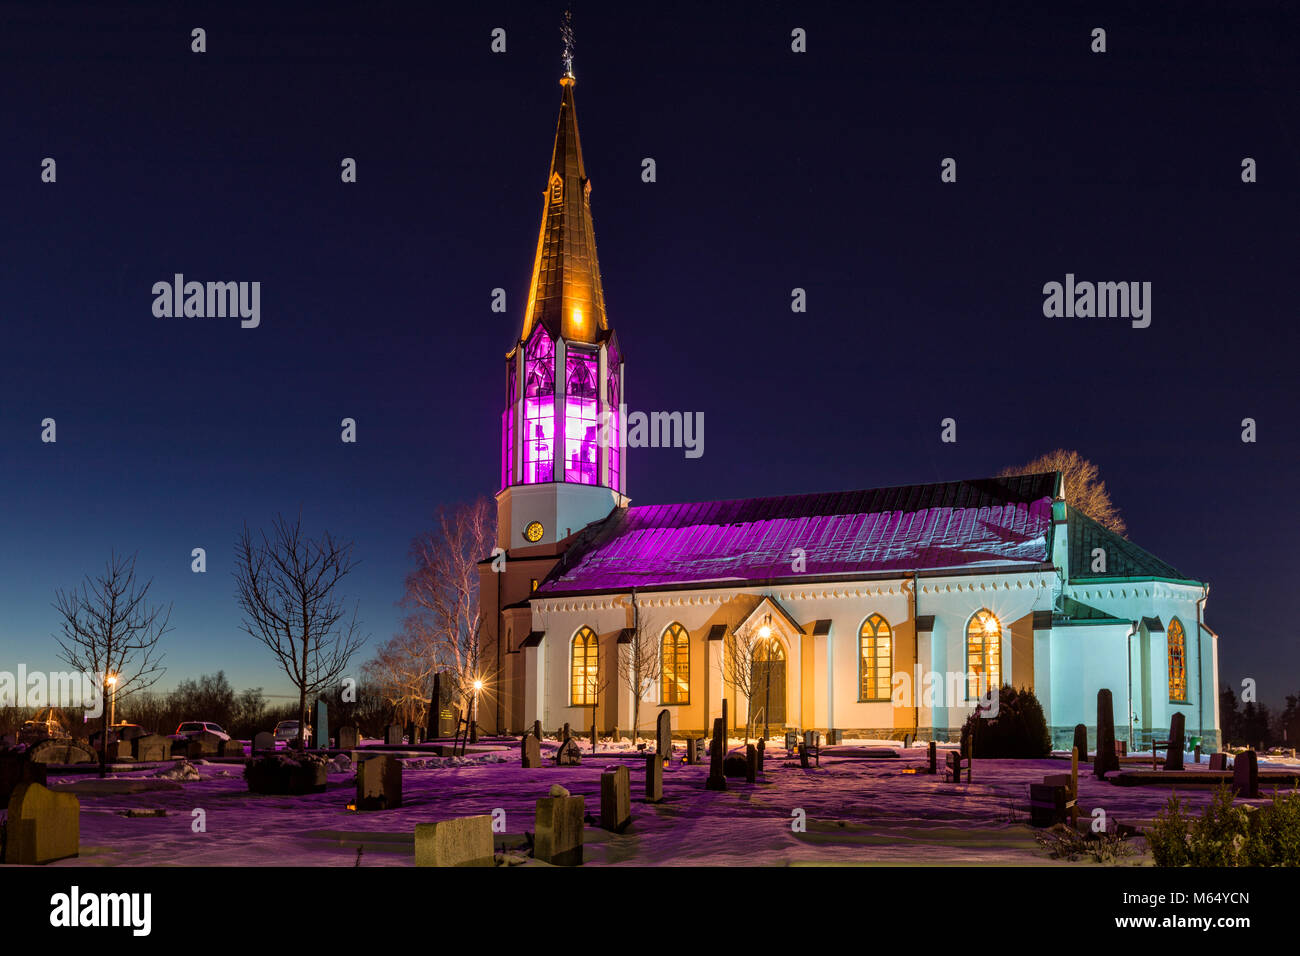 FLODA, SWEDEN - FEBRUARY 22 2018: Beautiful exterior view of swedish Skallsjö Church with the steeple lit up in predominantly purple at night in Floda, Lerum Municipality, Sweden  Model Release: No. Property Release: No. Stock Photo